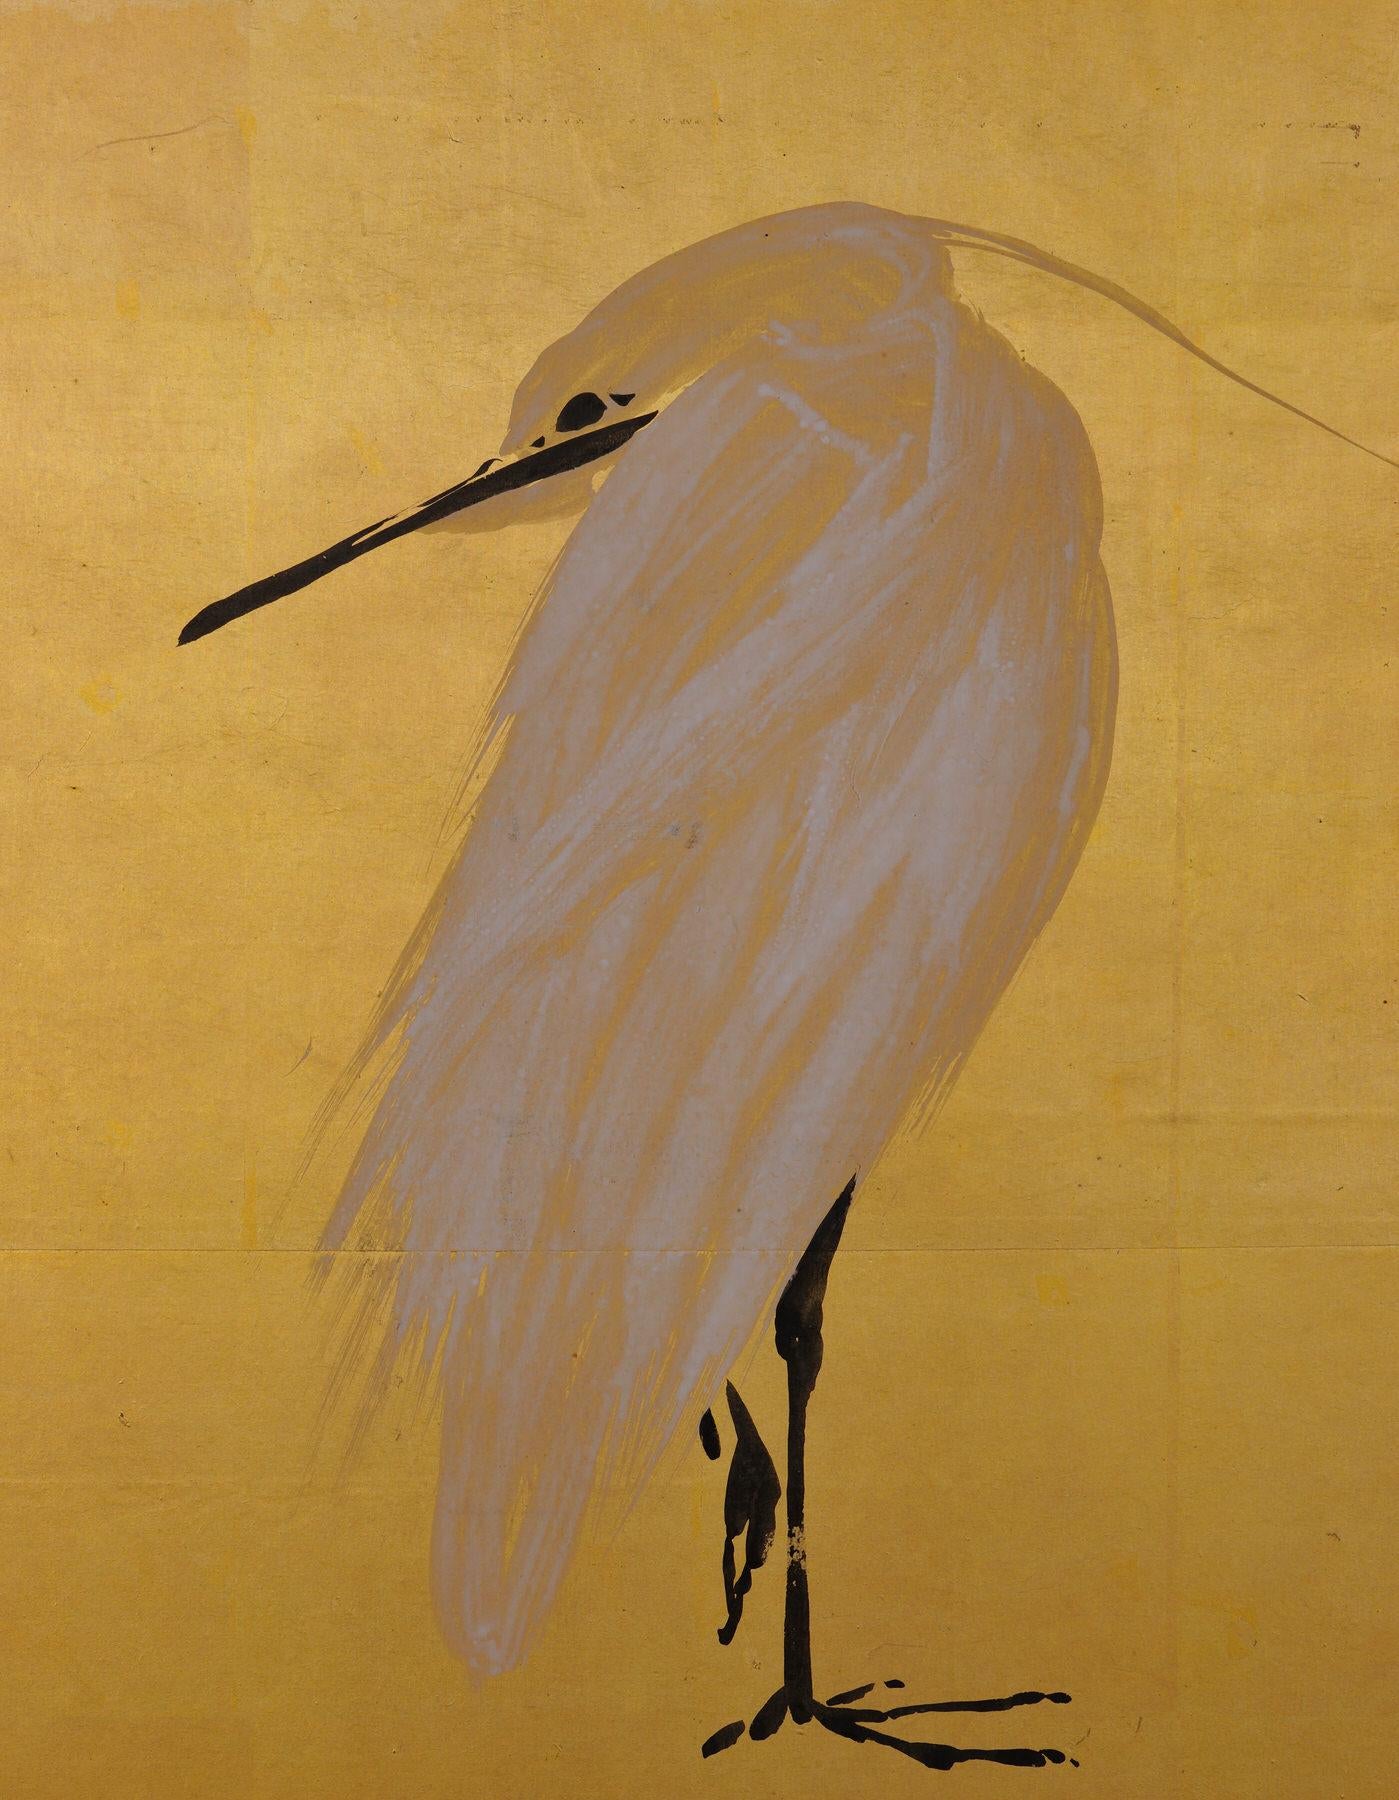 White Heron and Reeds

Kimura Buzan (1876-1942) 

circa 1925

Dimensions:

Screen: 122 cm x 188 cm (48” x 74”)

Painted across a small, four-fold screen, a heron stands on one leg, feathers extended and neck retracted against the cold.